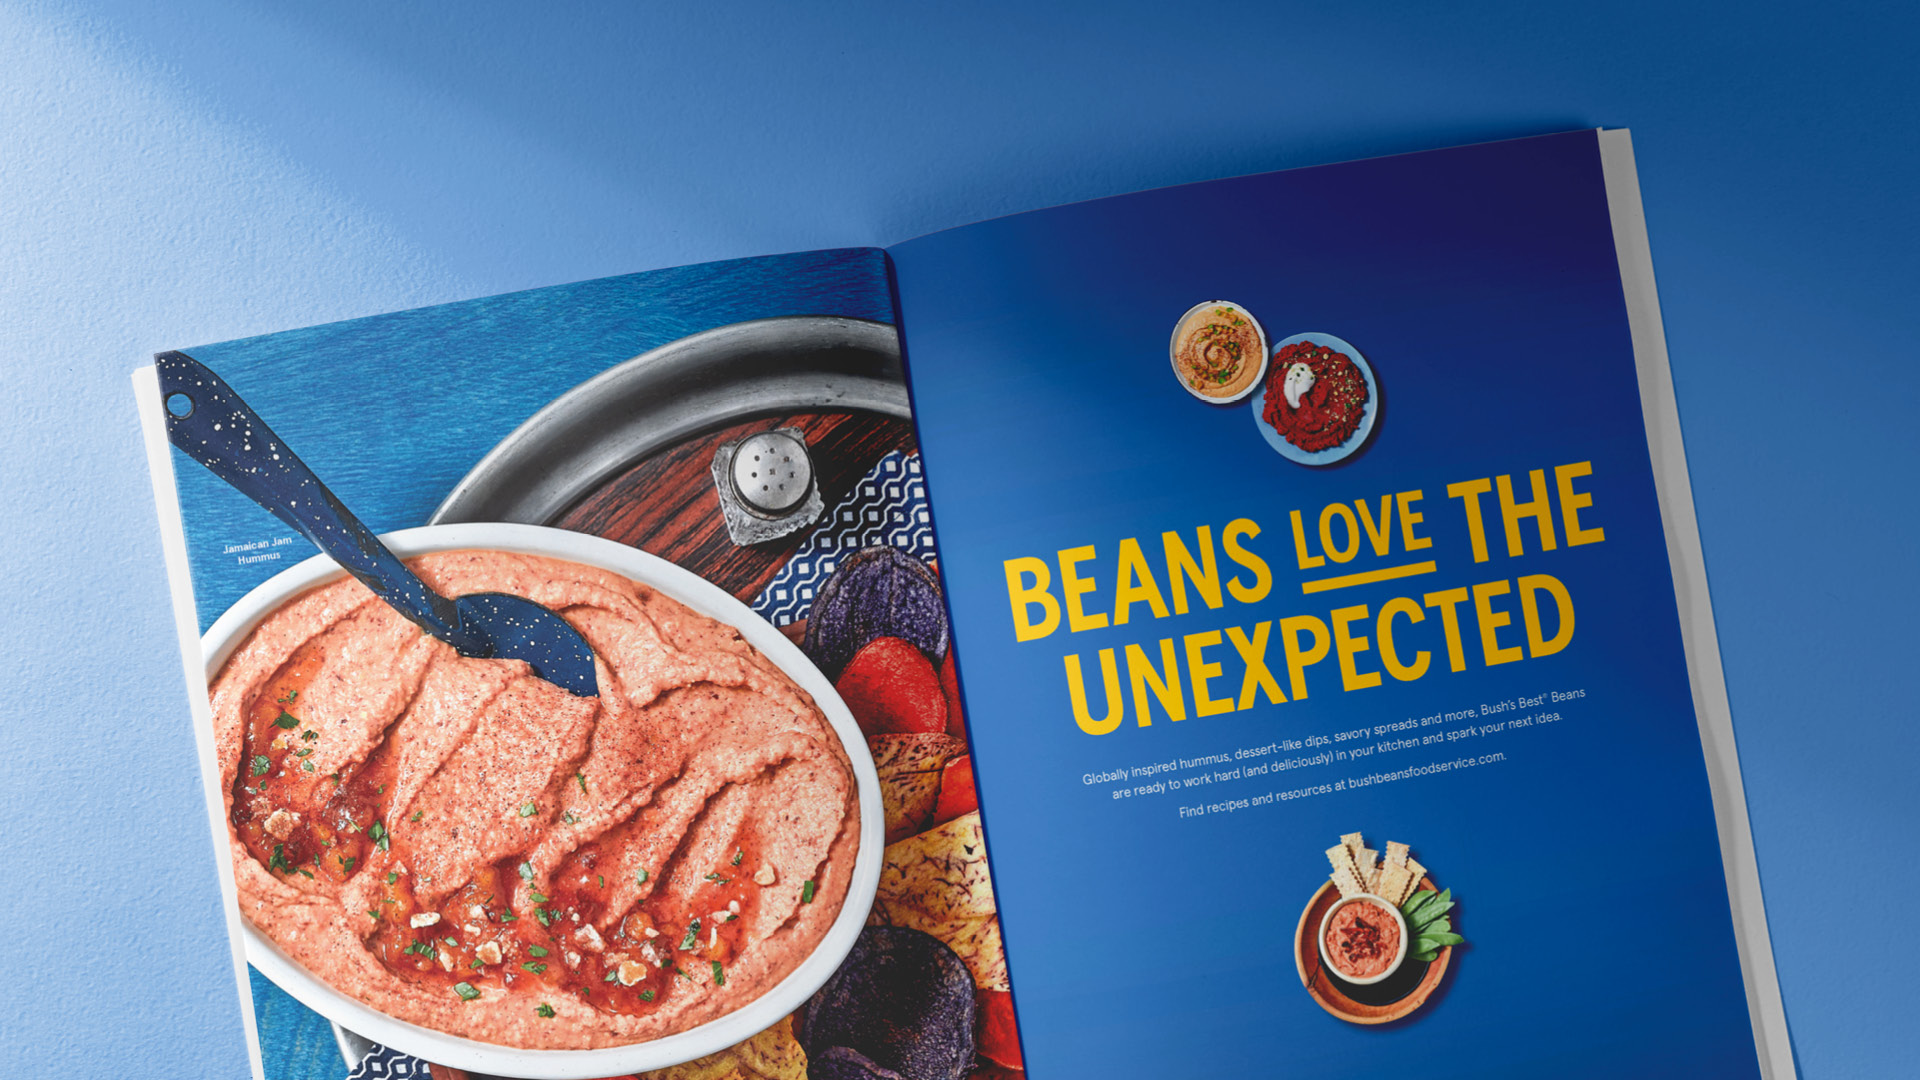 An open brochure on a blue background with dip photography and text that says "Beans love the unexpected."